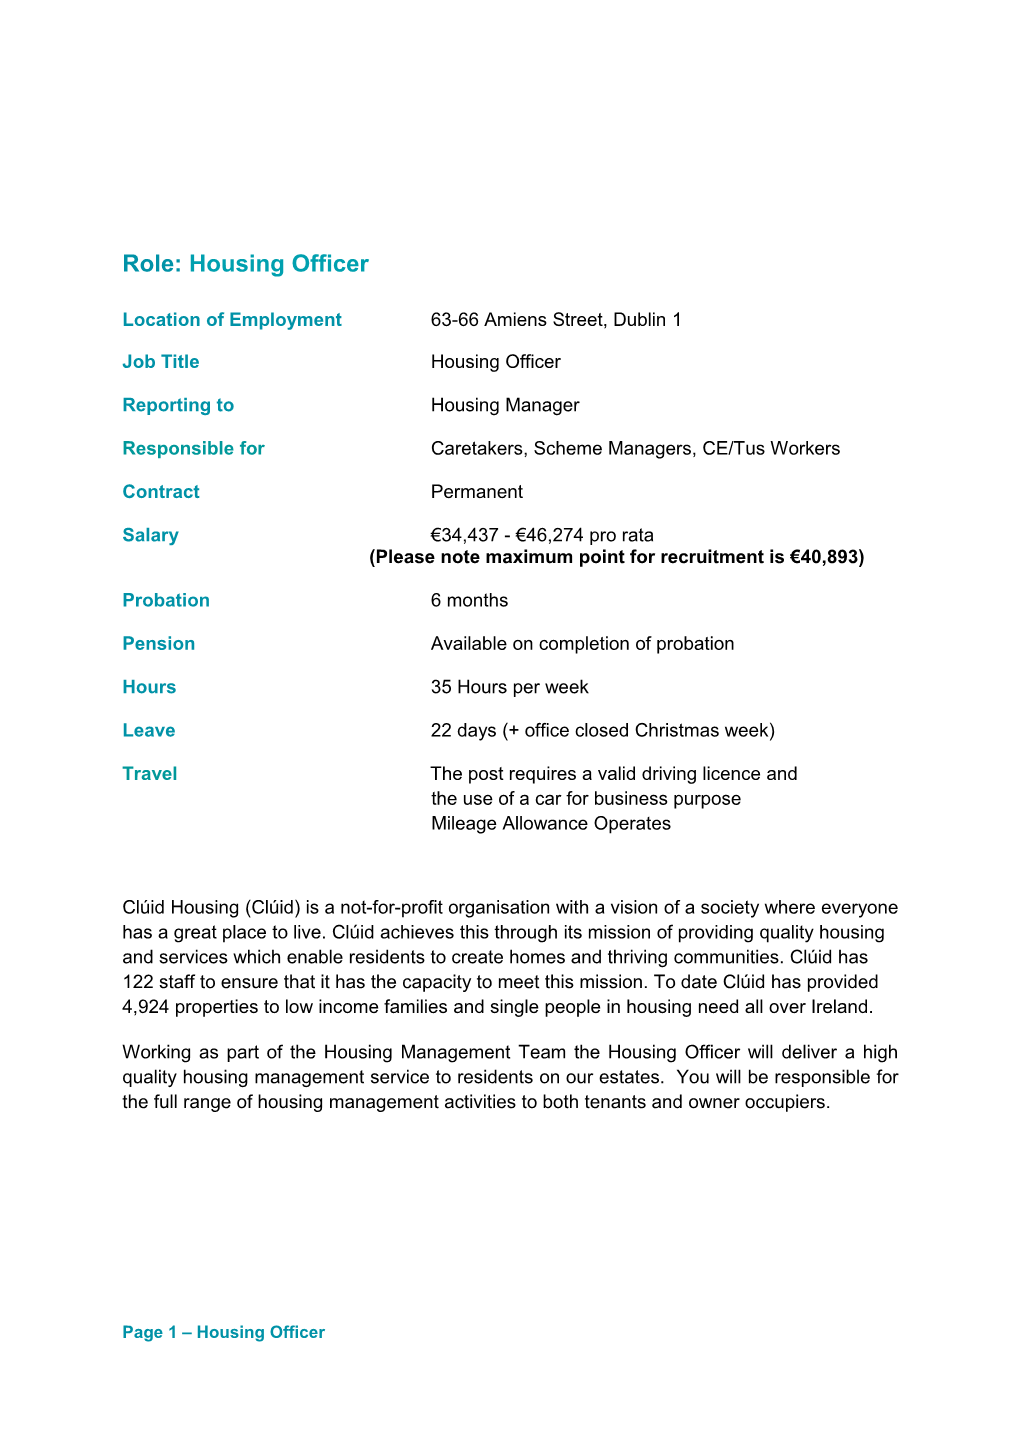 Role: Housing Officer